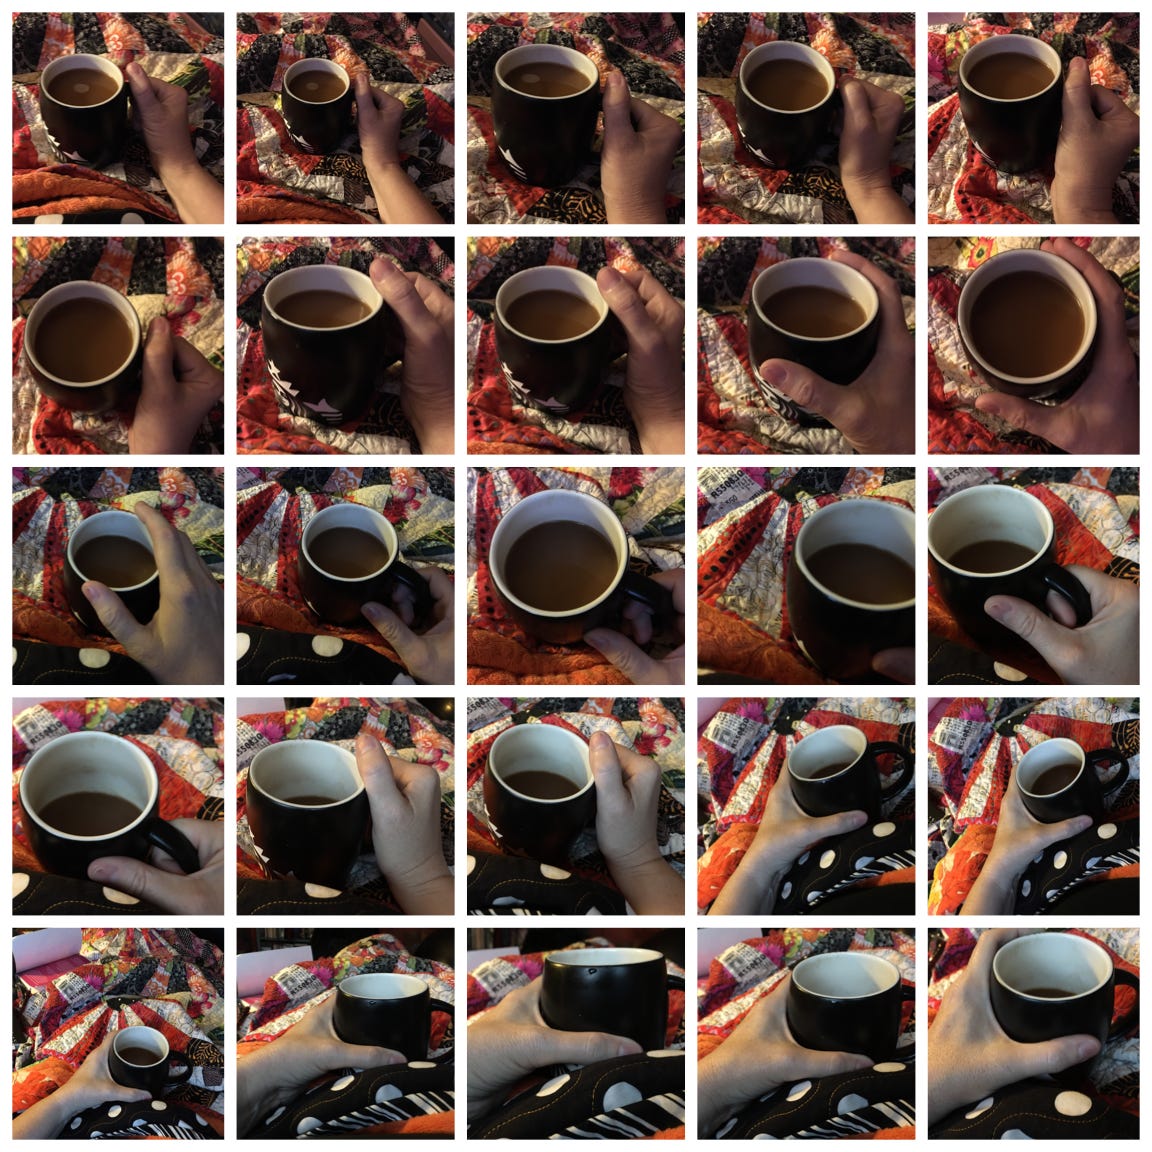 25 images of a hand and coffee cup